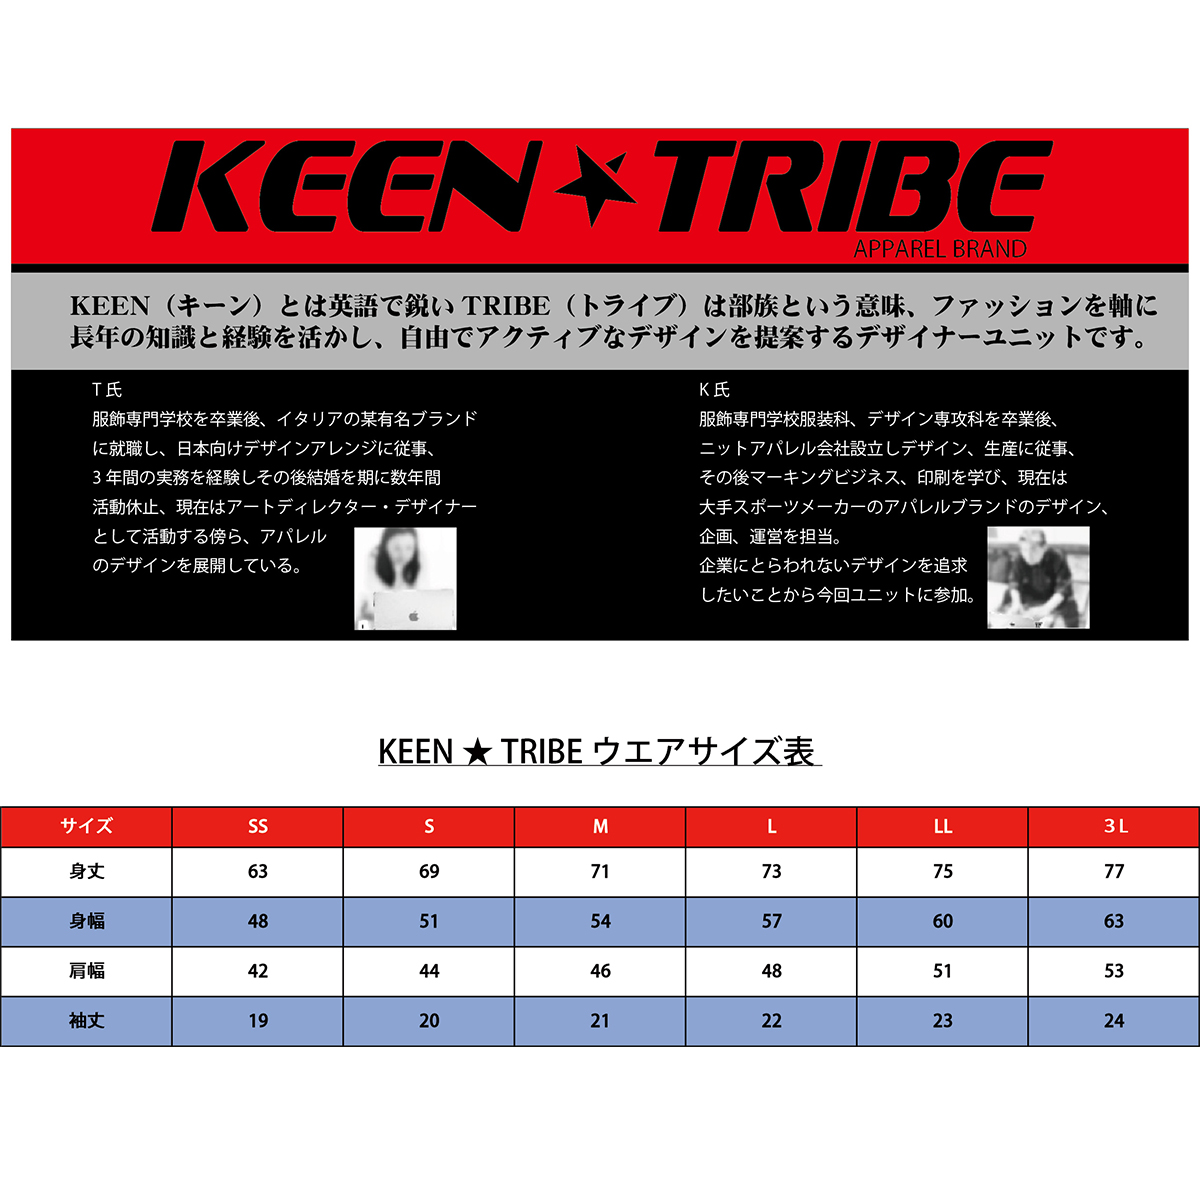 KEEN ★ TRIBE　KT-16(受注生産)